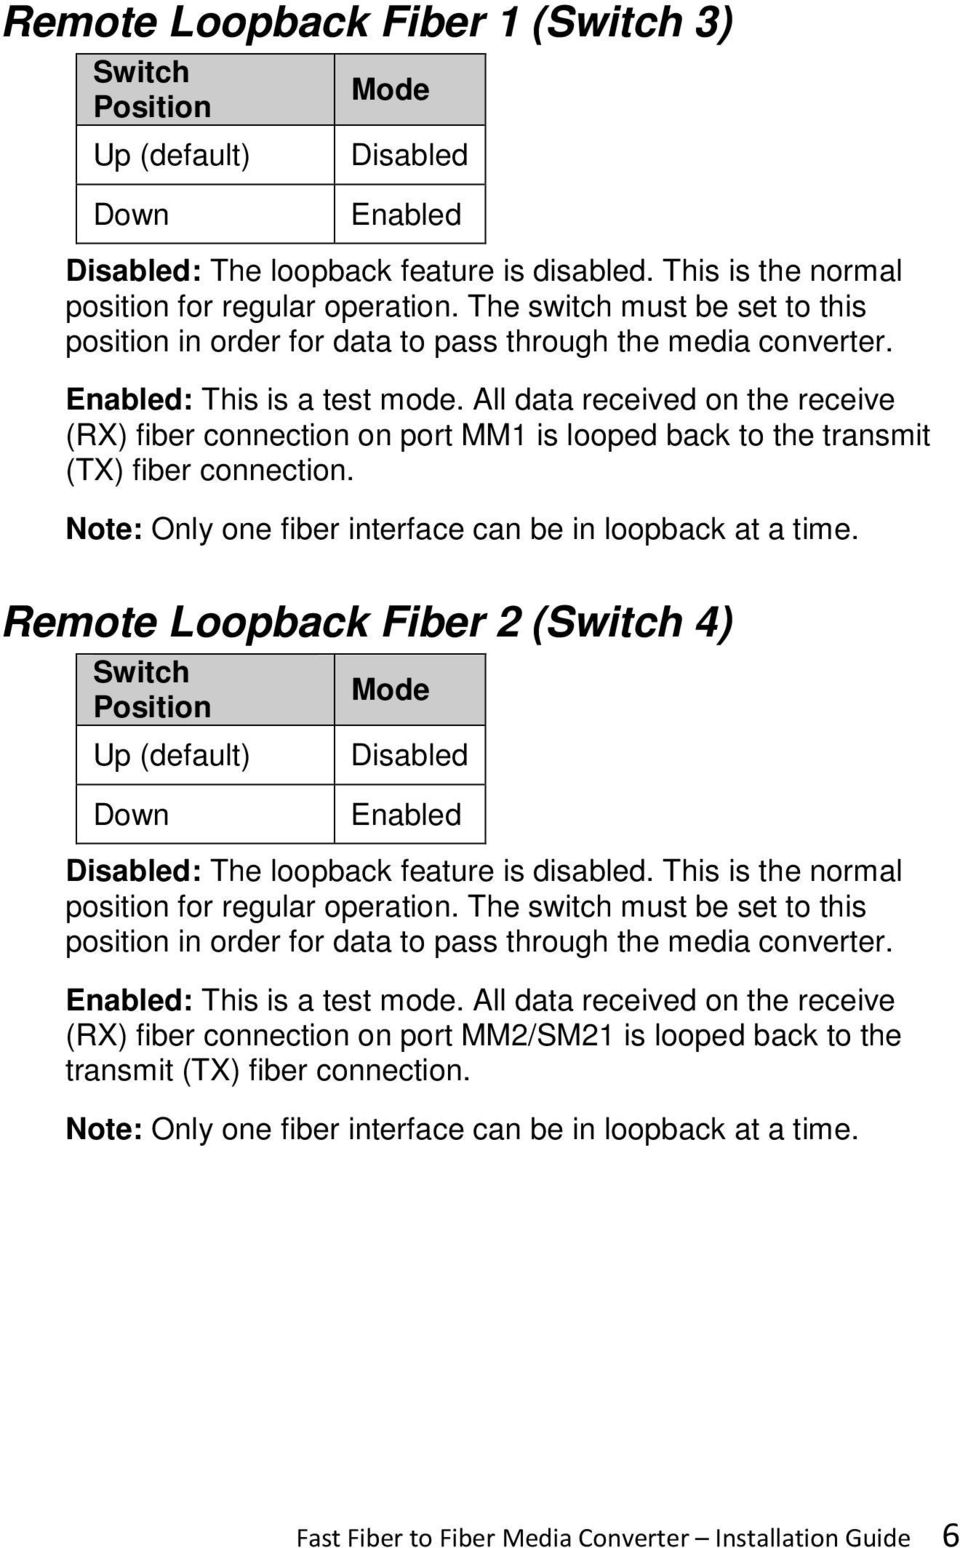 All data received on the receive (RX) fiber connection on port MM1 is looped back to the transmit (TX) fiber connection. Note: Only one fiber interface can be in loopback at a time.